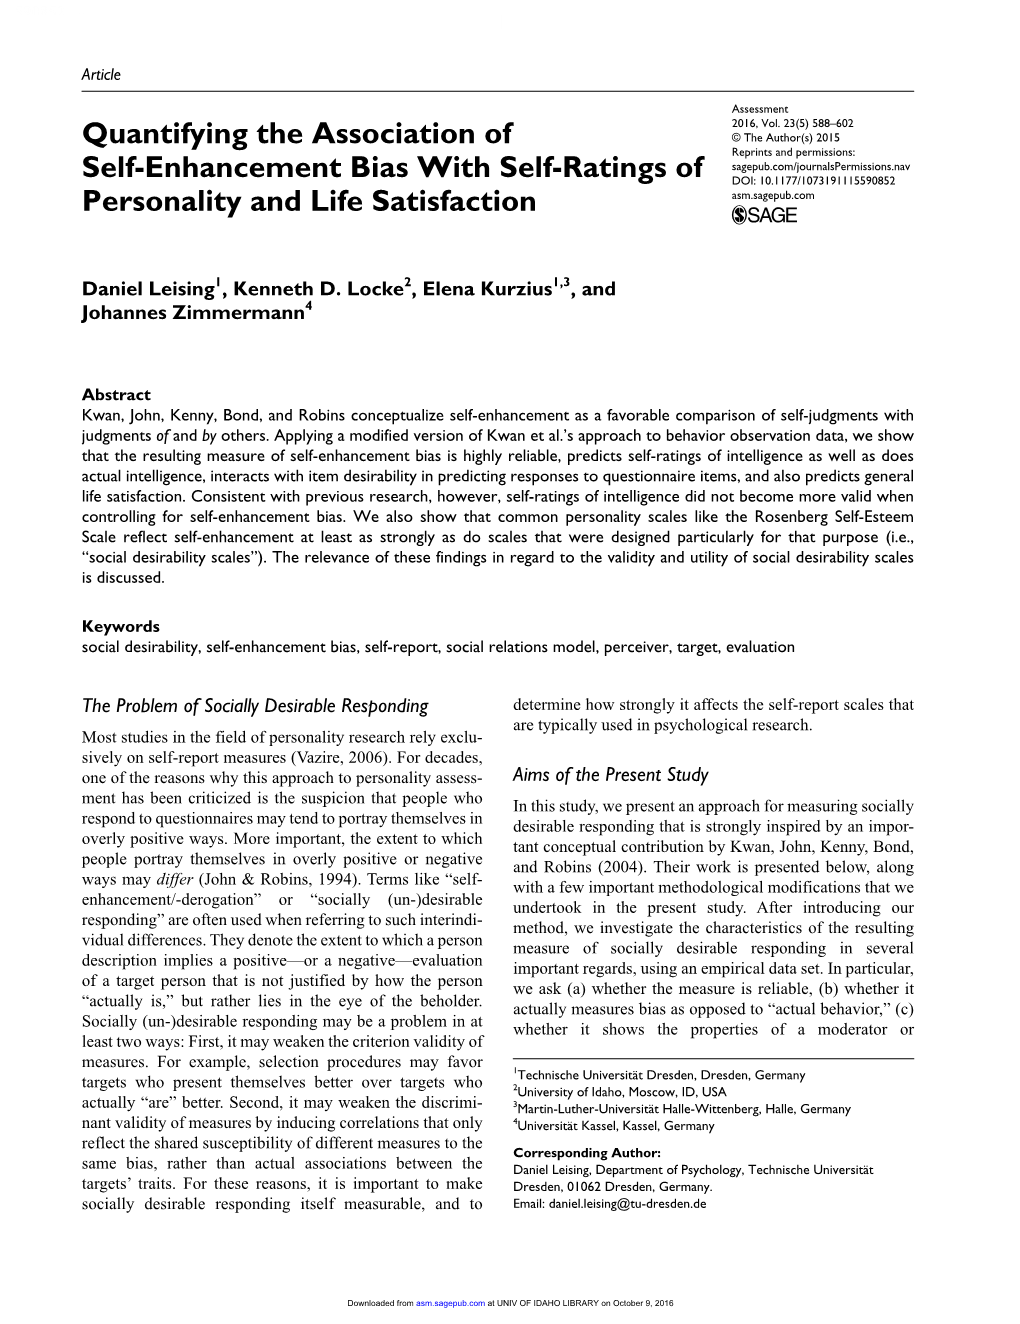 Quantifying the Association of Self